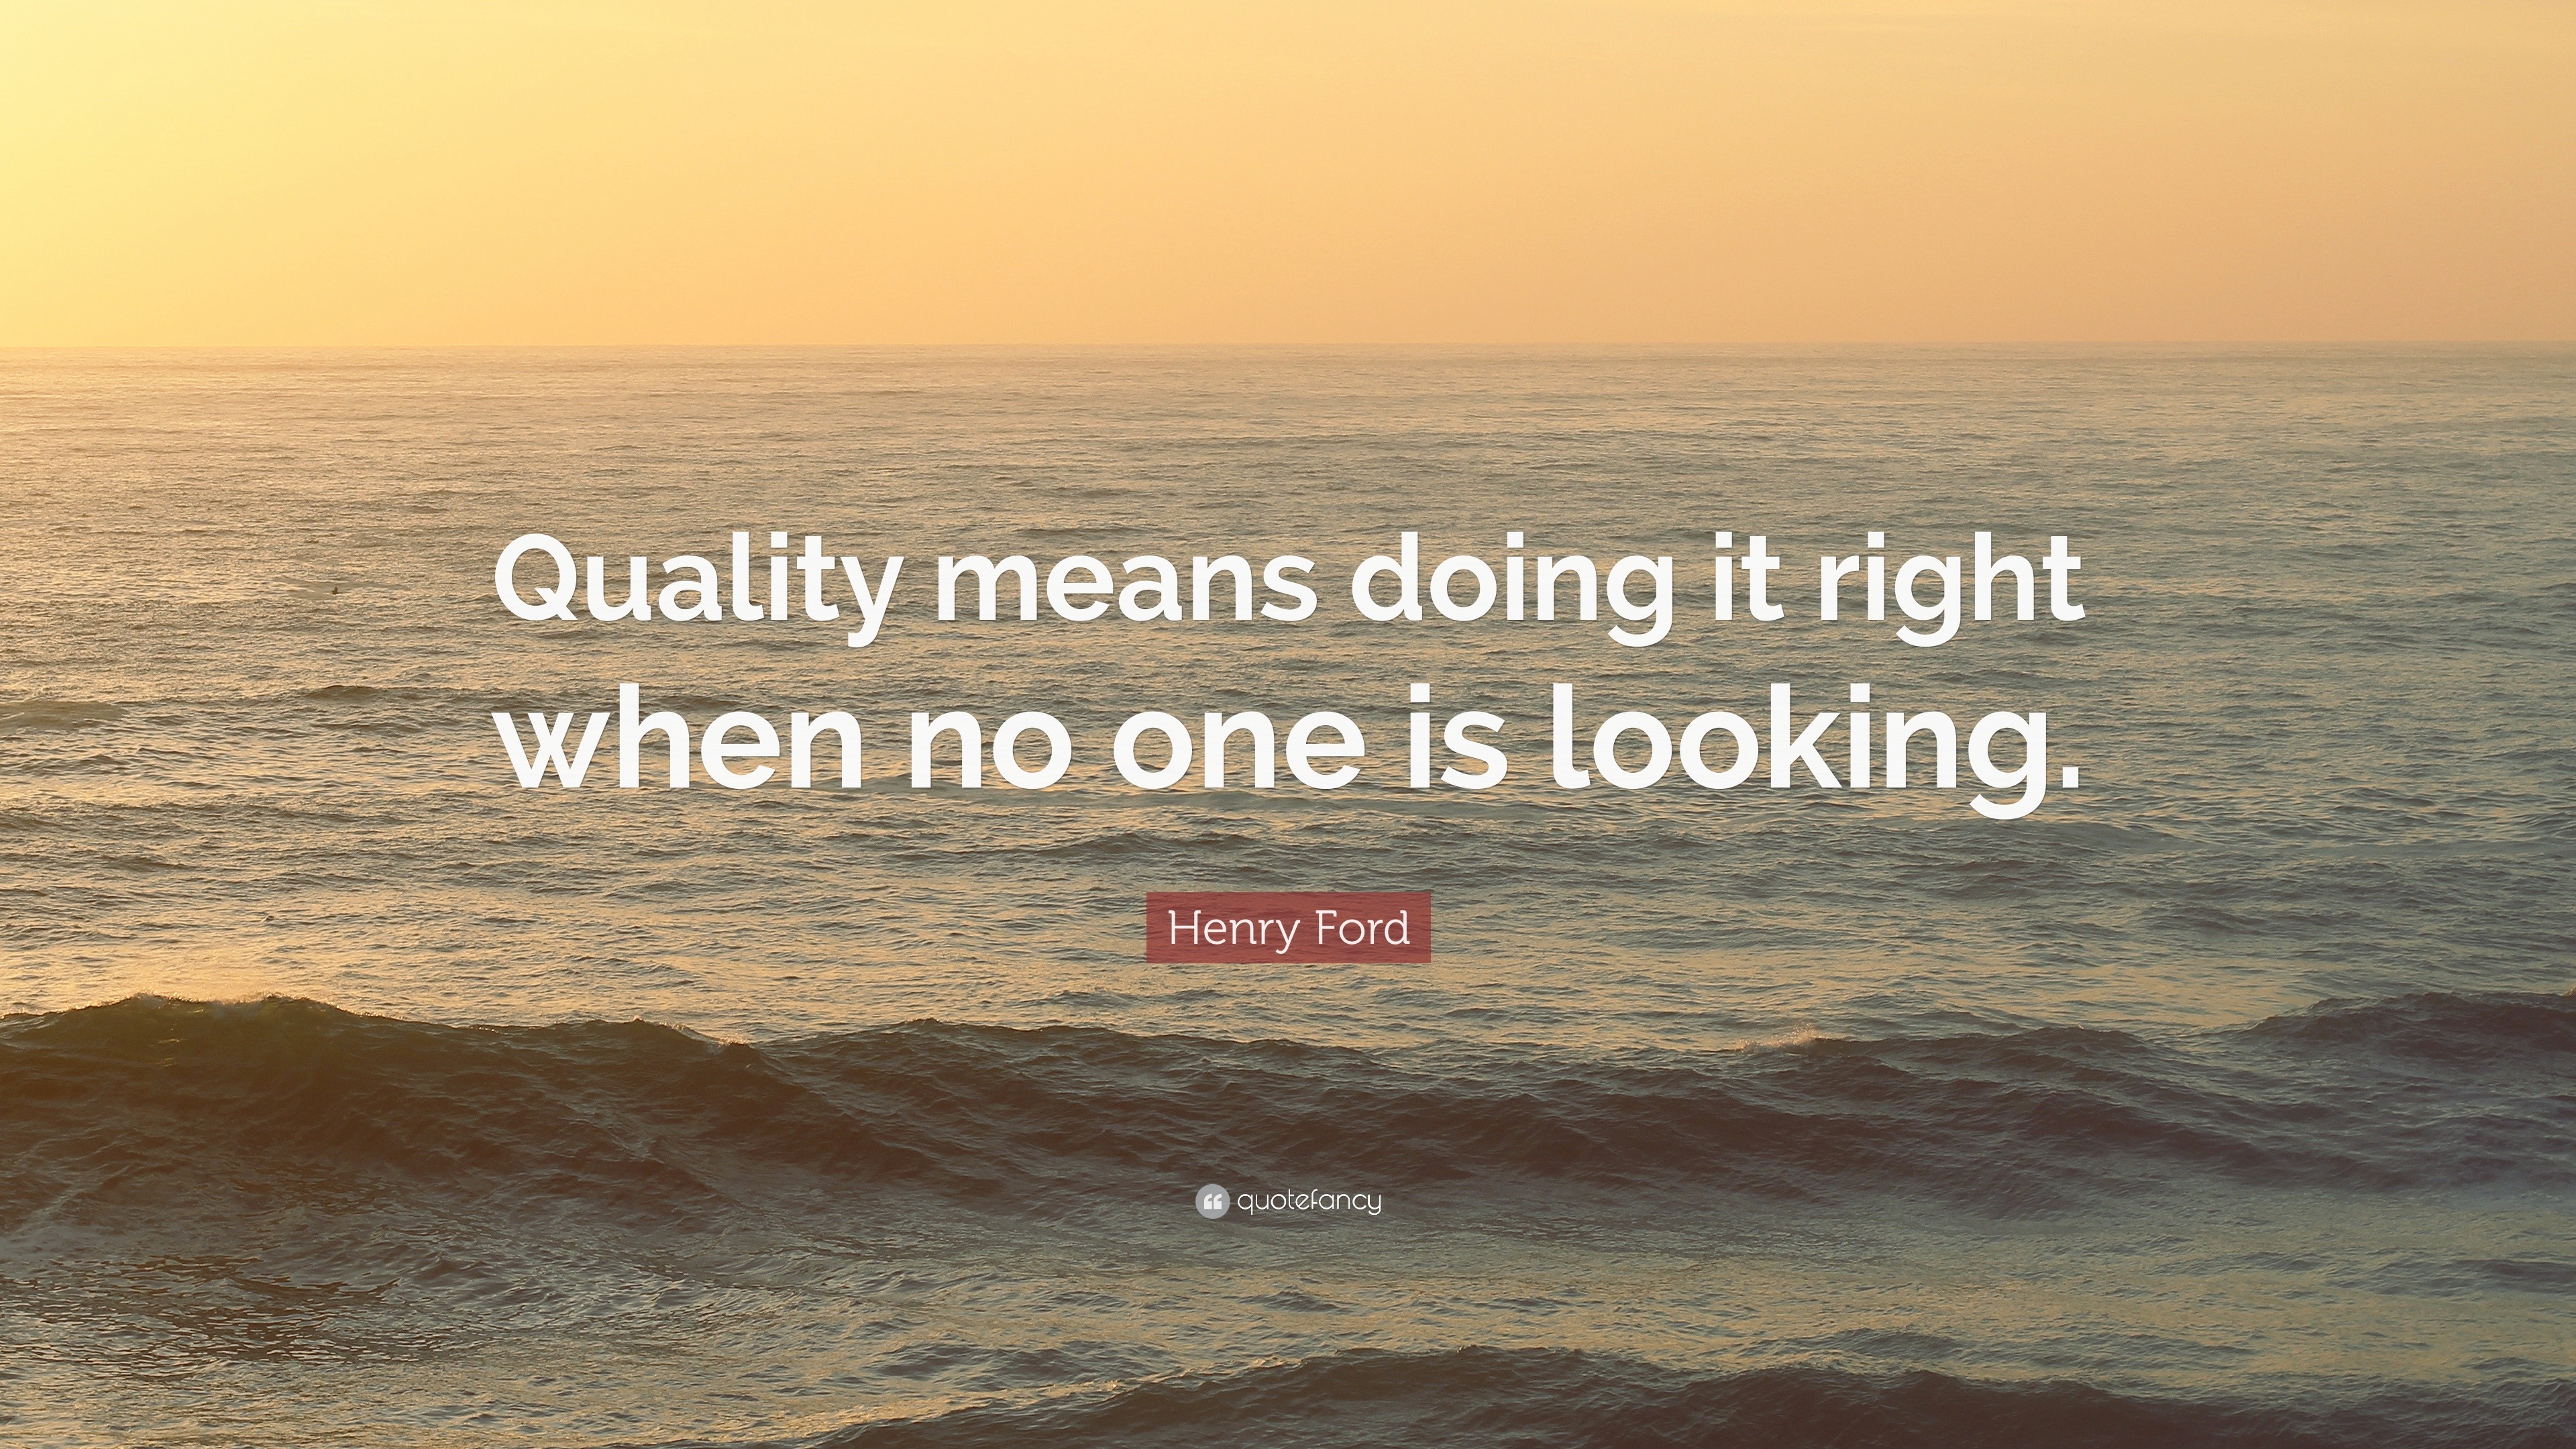 Henry Ford Quote: “Quality means doing it right when no one is looking.”